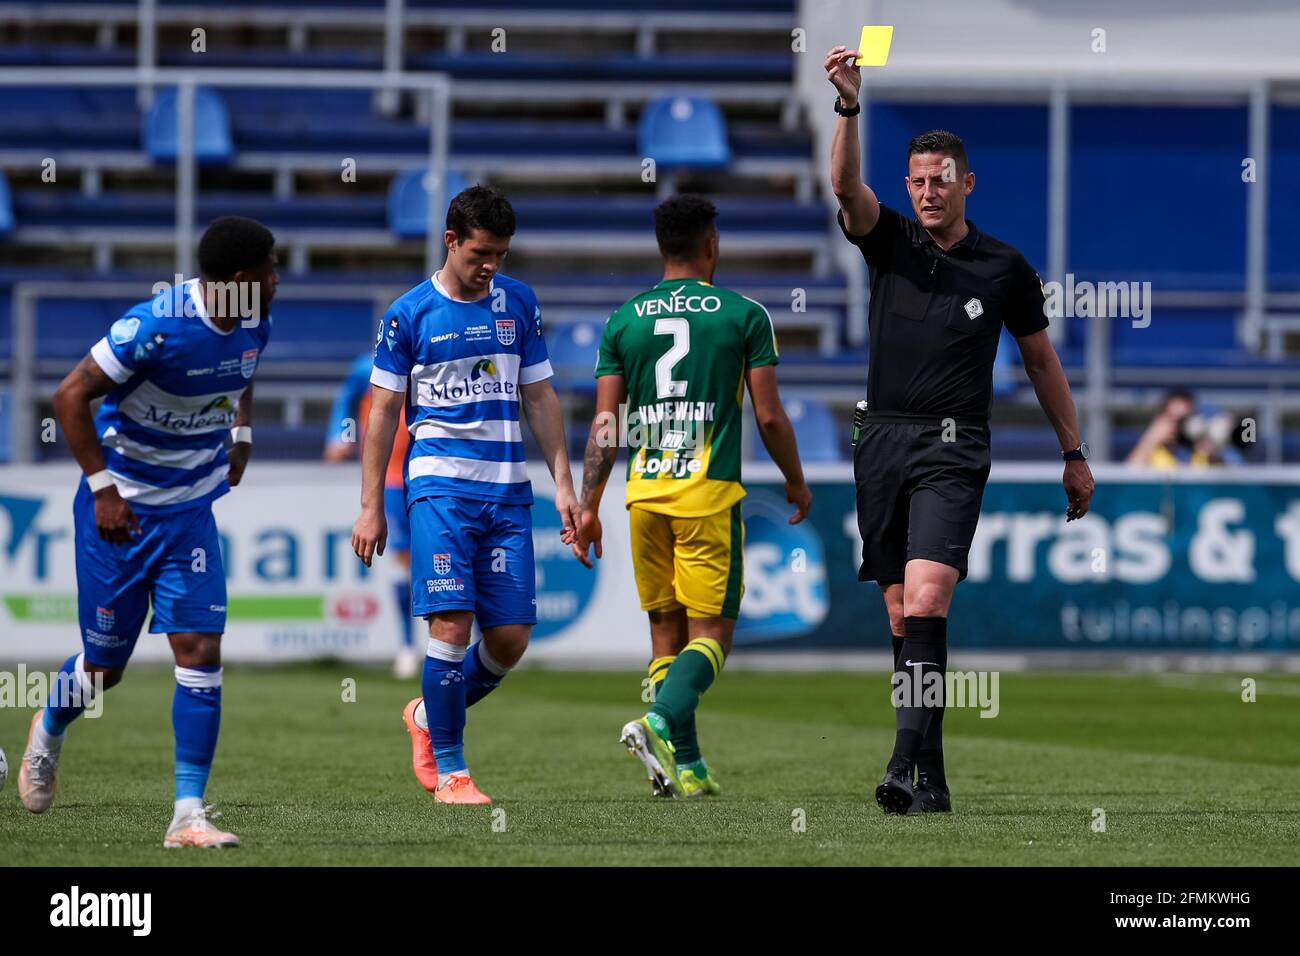 ZWOLLE, NETHERLANDS - MAY 9: Referee Jeroen Manschot shows a yellow card to Kenneth Paal of PEC Zwolle during the Dutch Eredivisie match between PEC Z Stock Photo